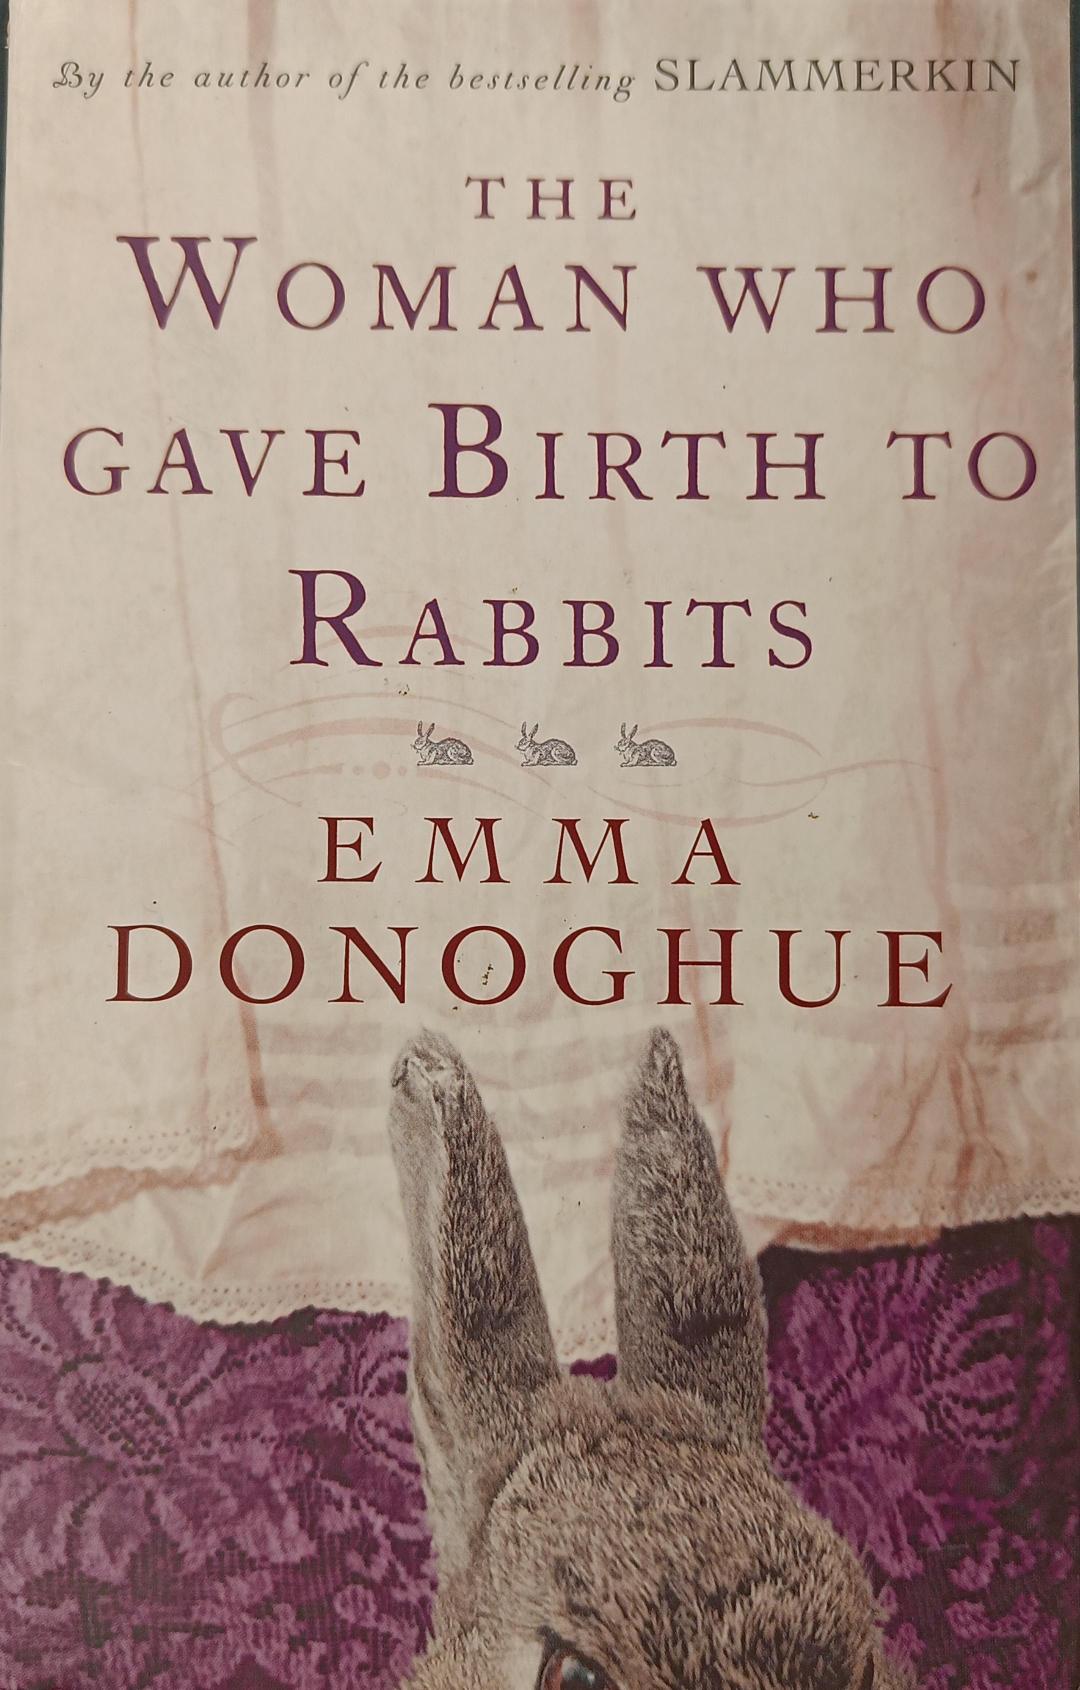 The Woman Who Gave Birth to Rabbits, by Emma Donoghue